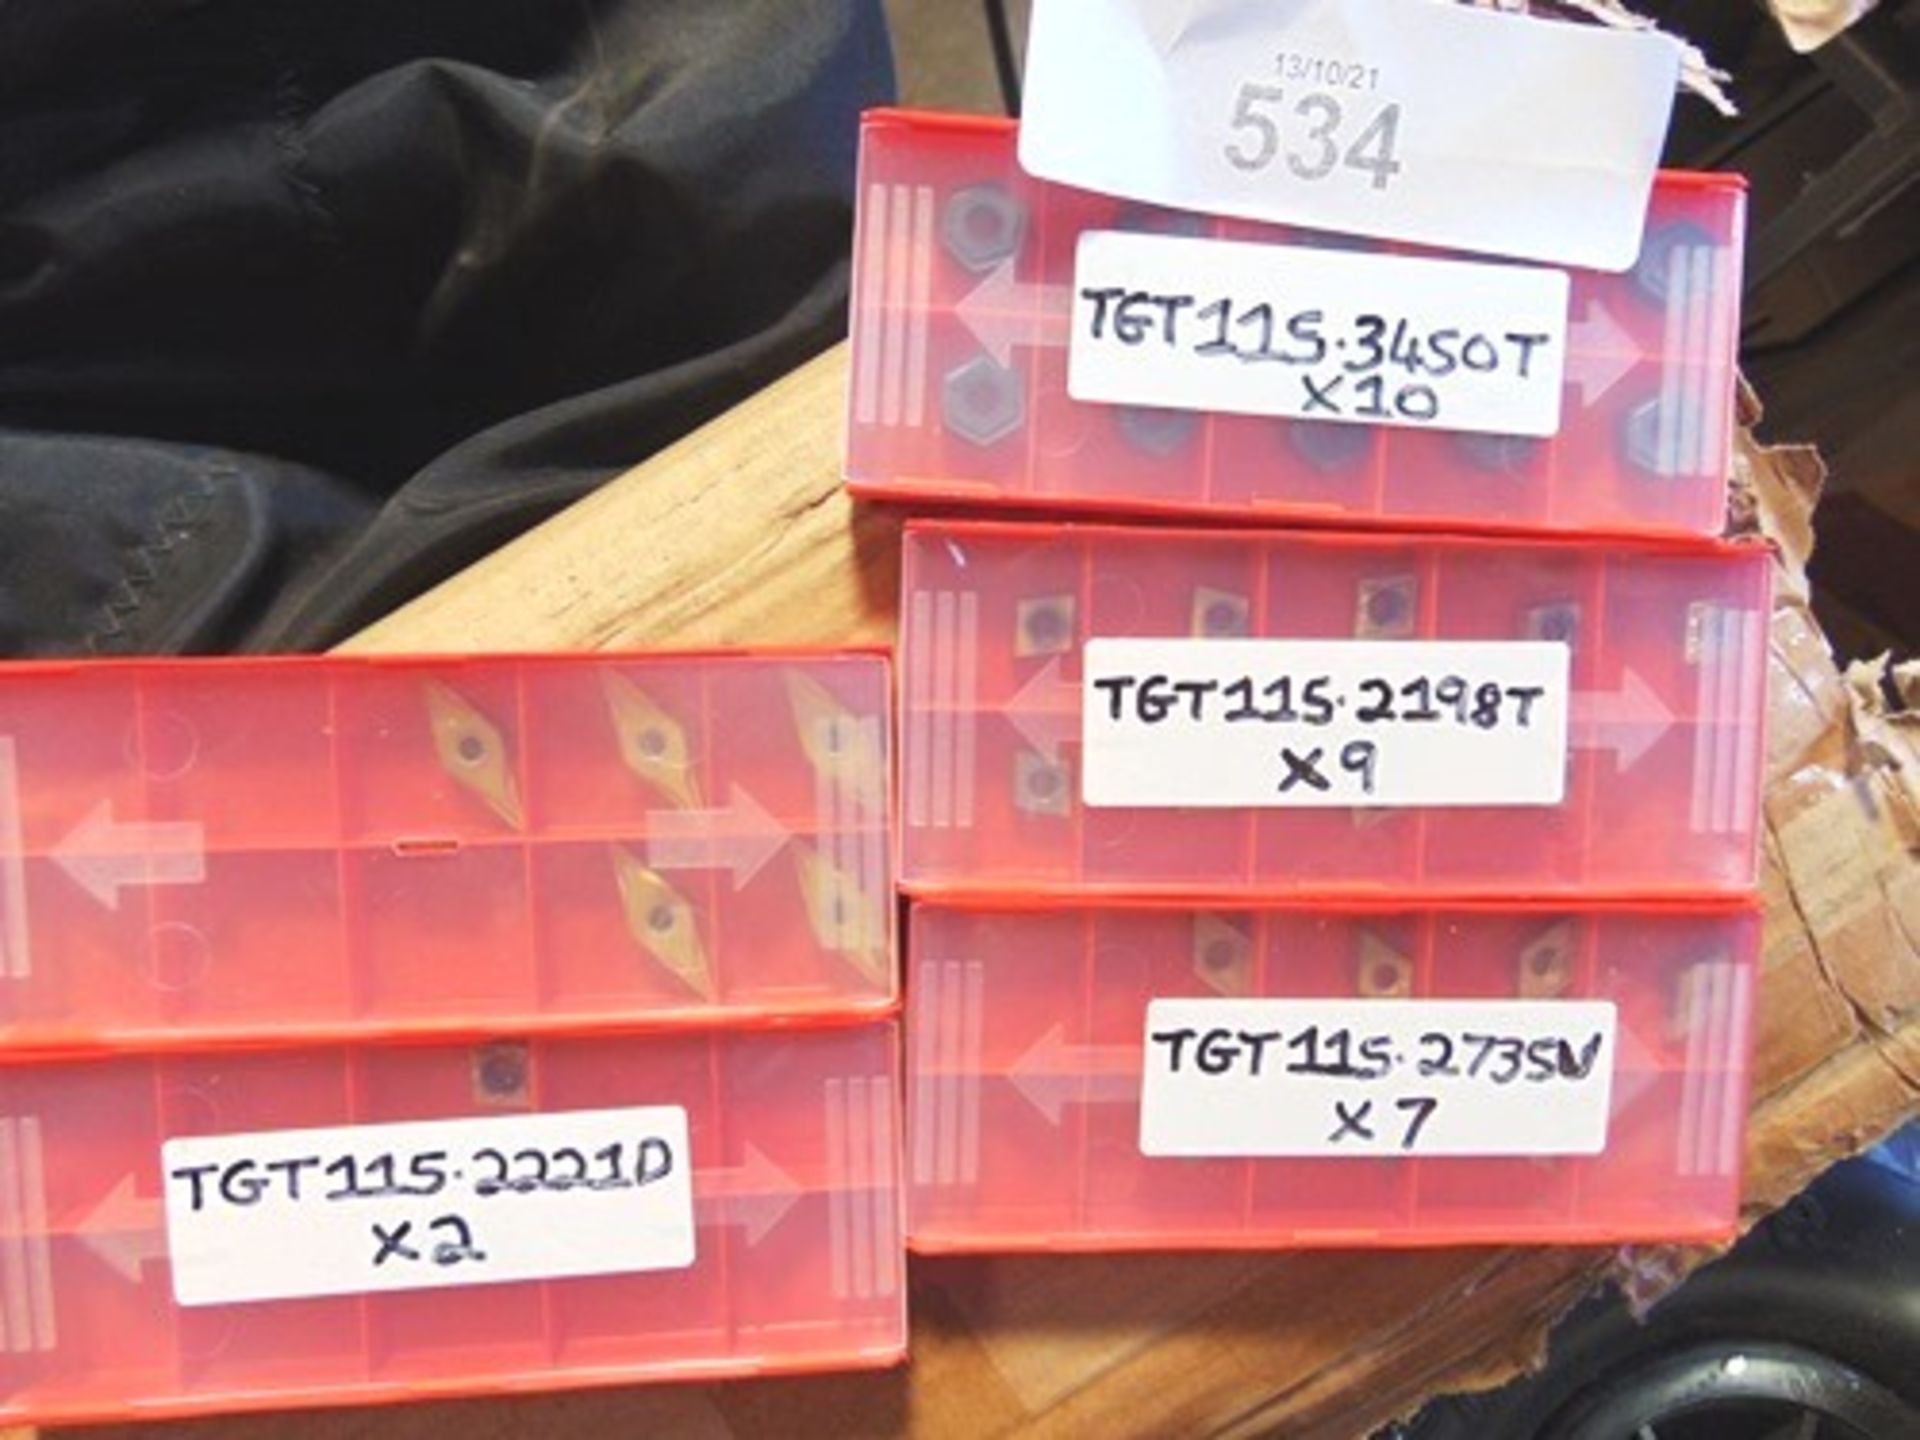 Approximately 30 x metal lathe inserts including 10 x TGT115.3450Tm 9 x TGT115.2198T, 7 x TGT115.